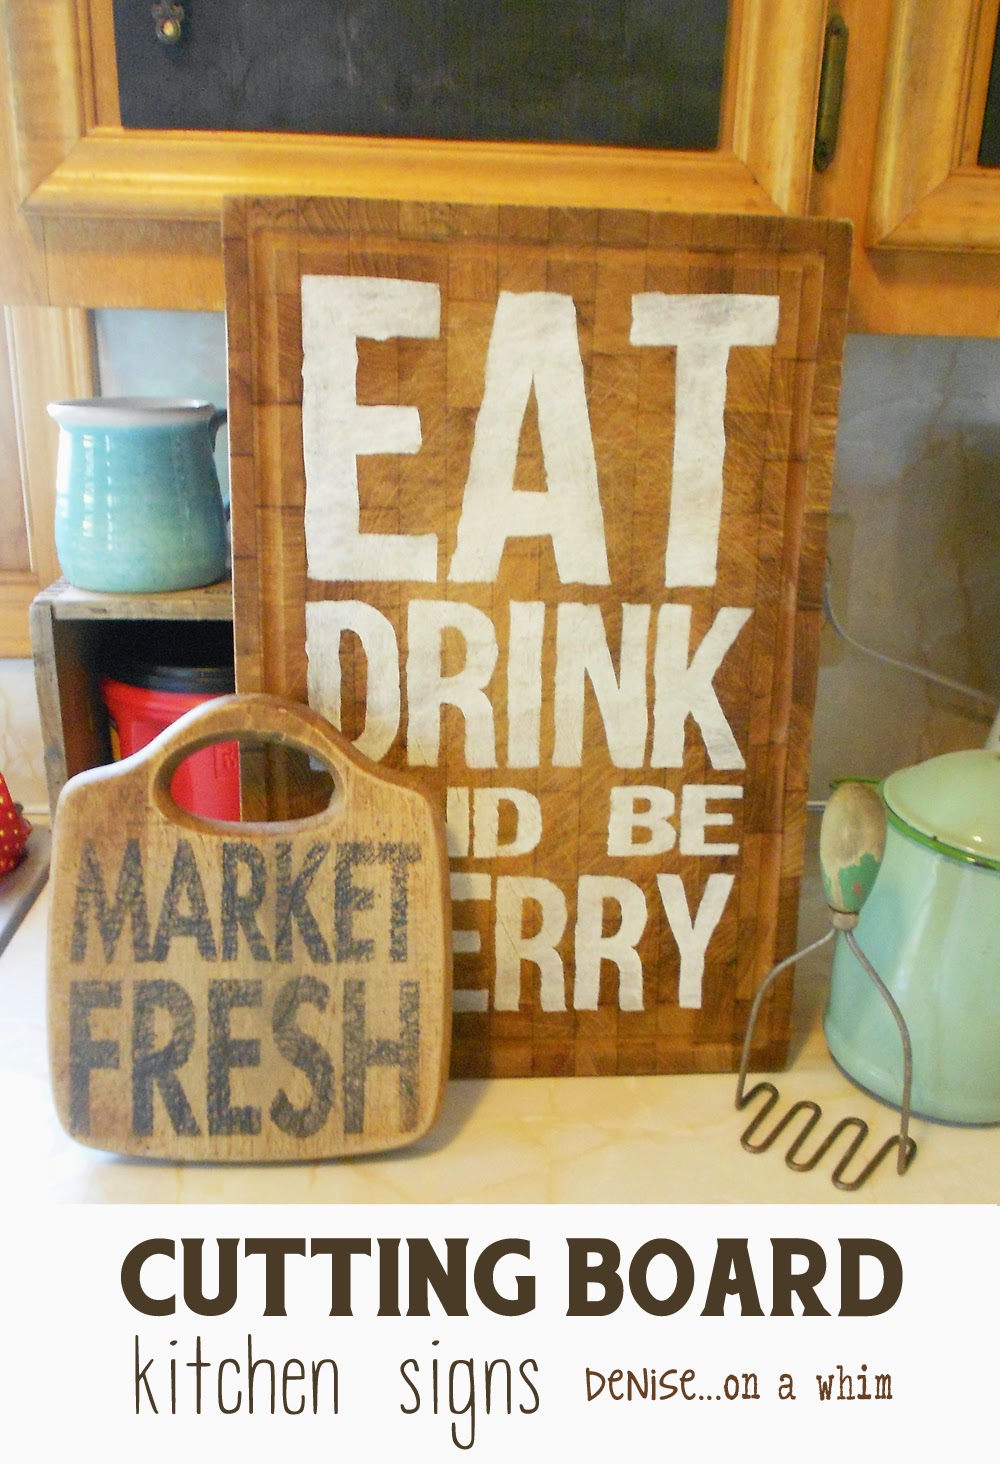 Garage Sale Cutting Boards Find New Life as Kitchen Signs via Denise on a Whim.